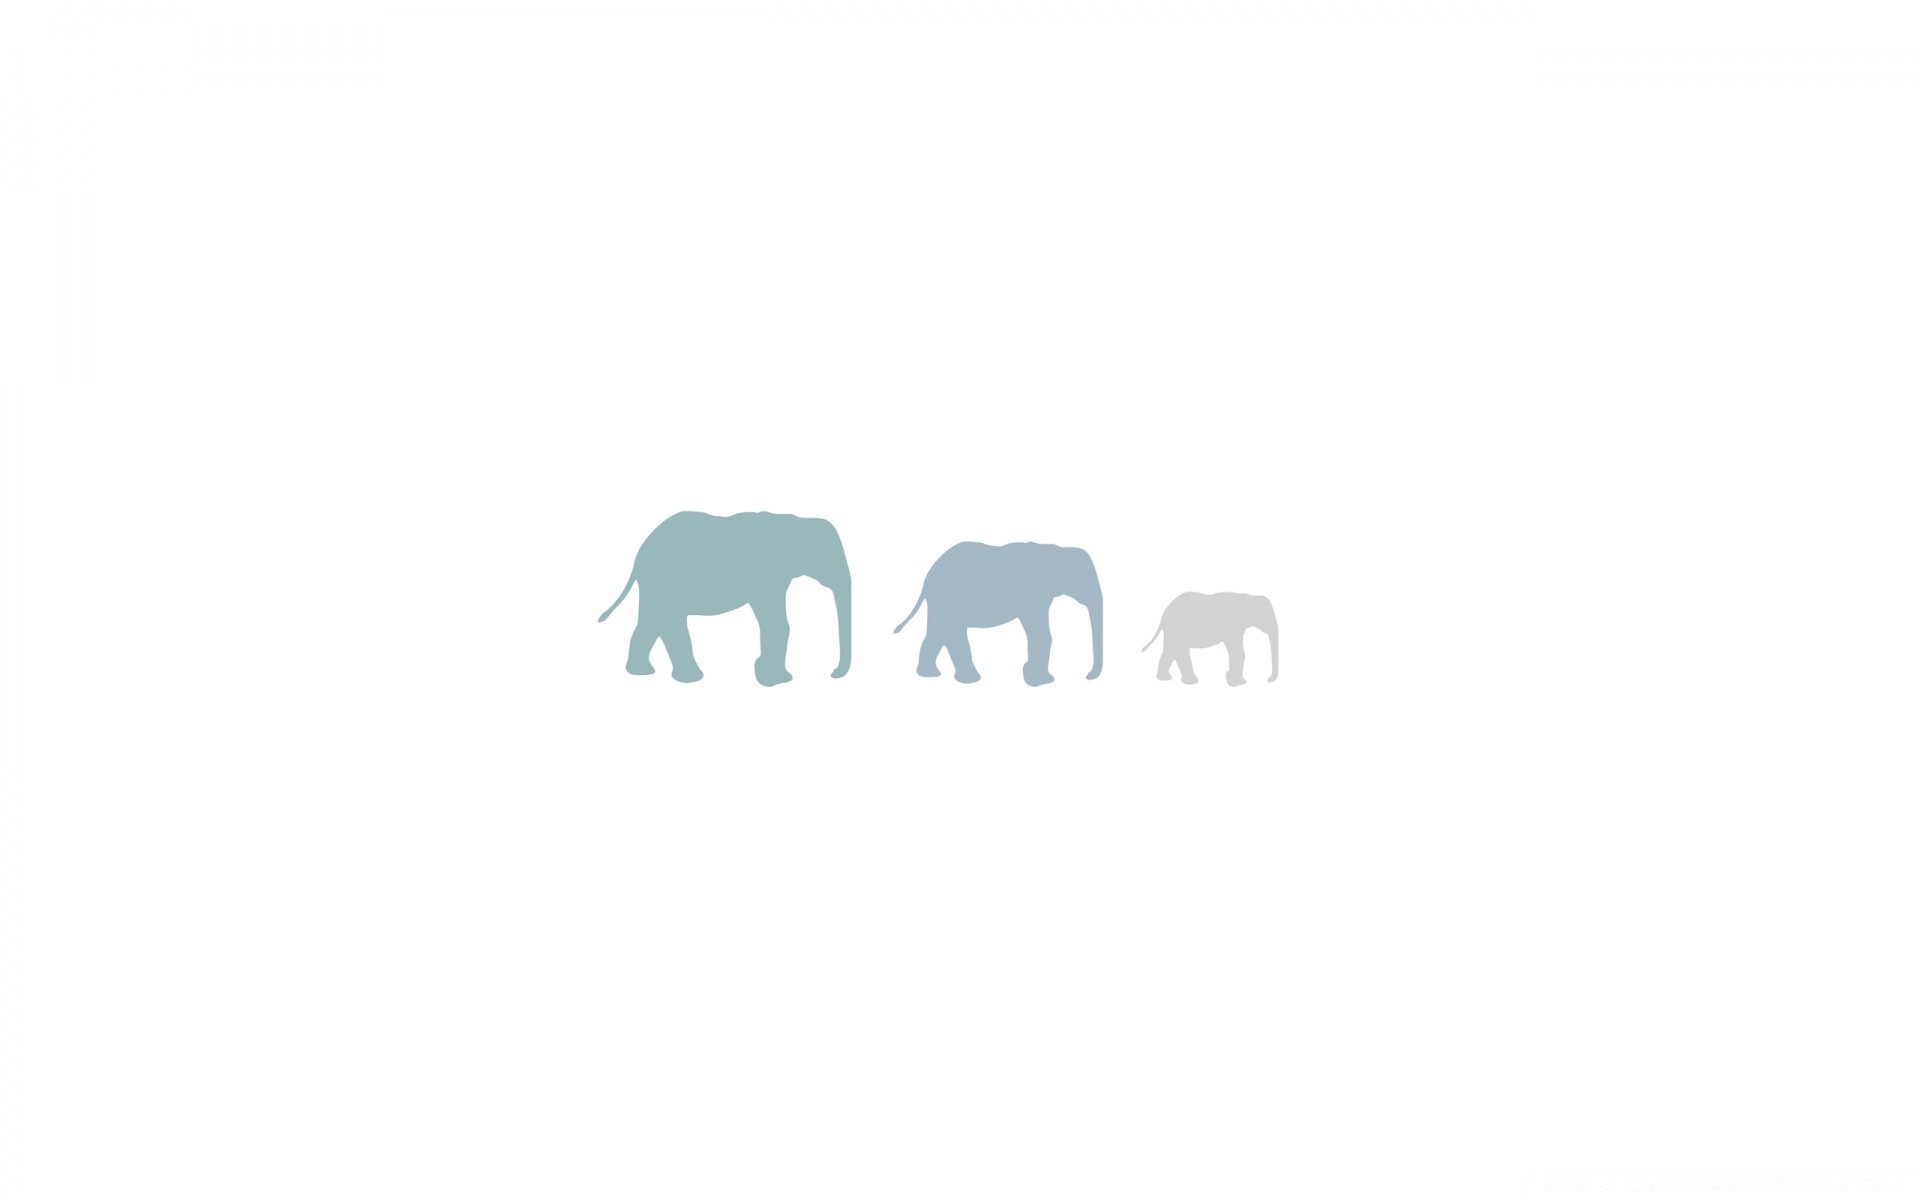 A picture of three elephants walking together - Elephant